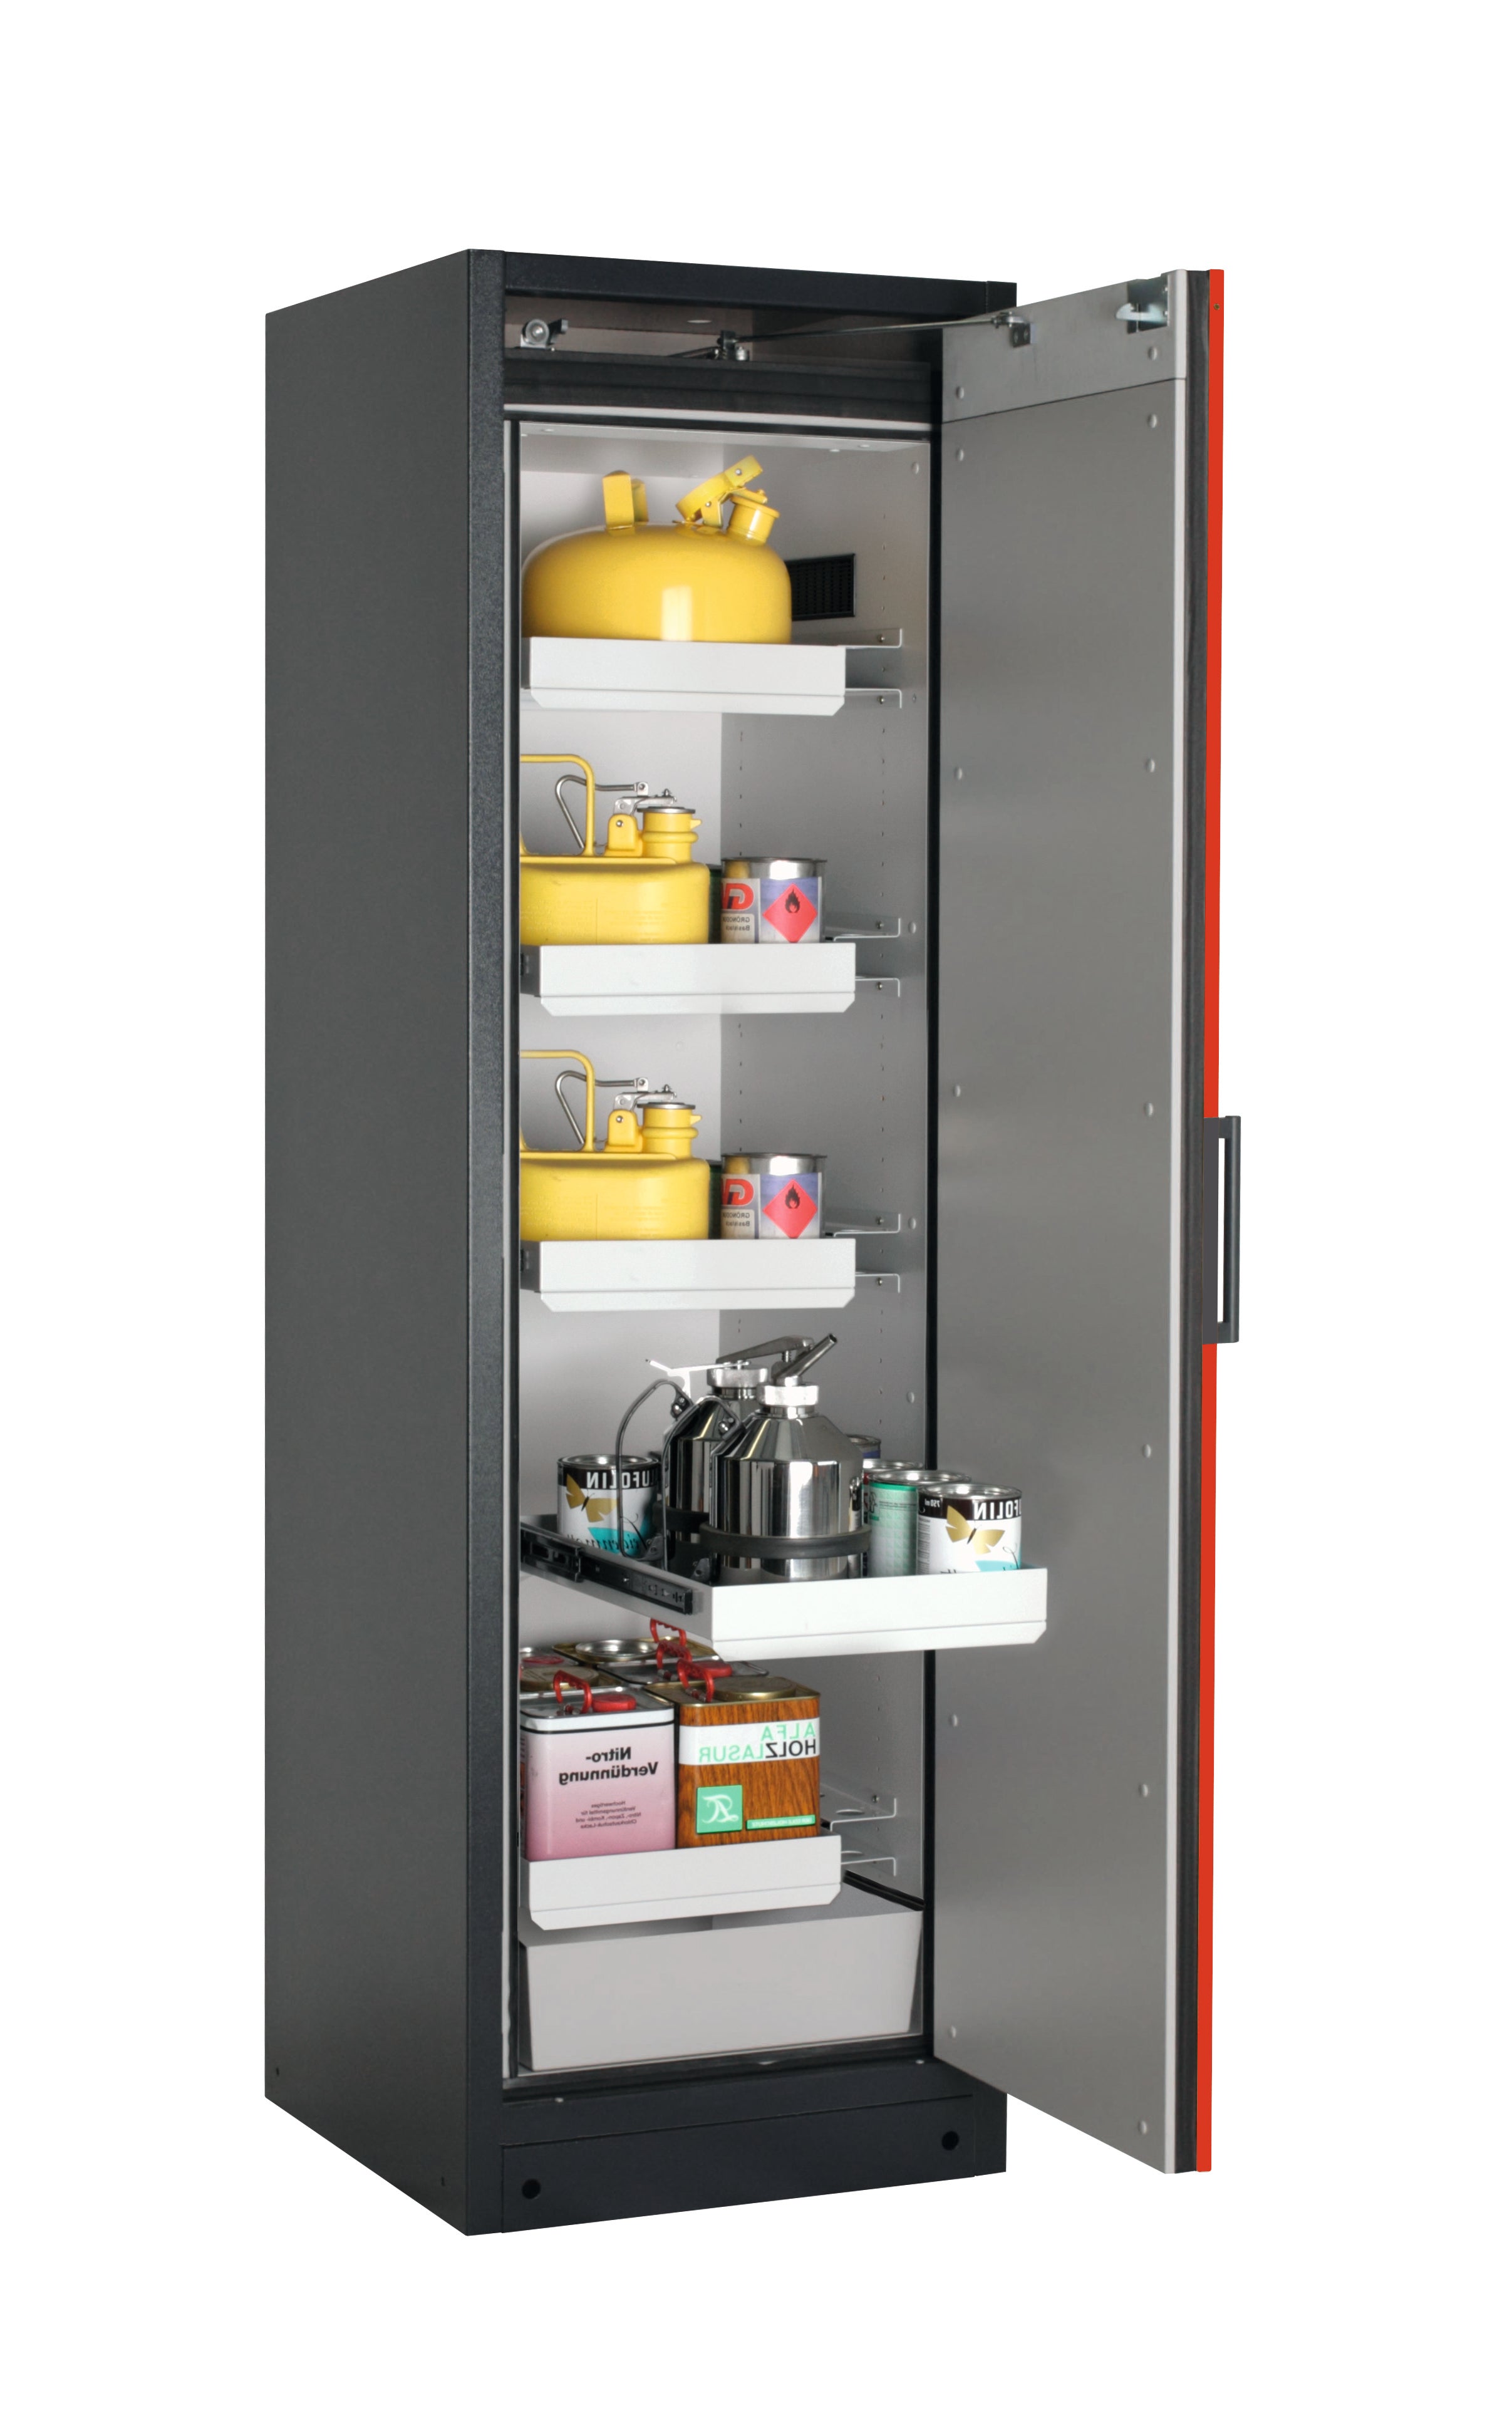 Type 90 safety storage cabinet Q-CLASSIC-90 model Q90.195.060.R in traffic red RAL 3020 with 4x drawer (standard) (sheet steel),